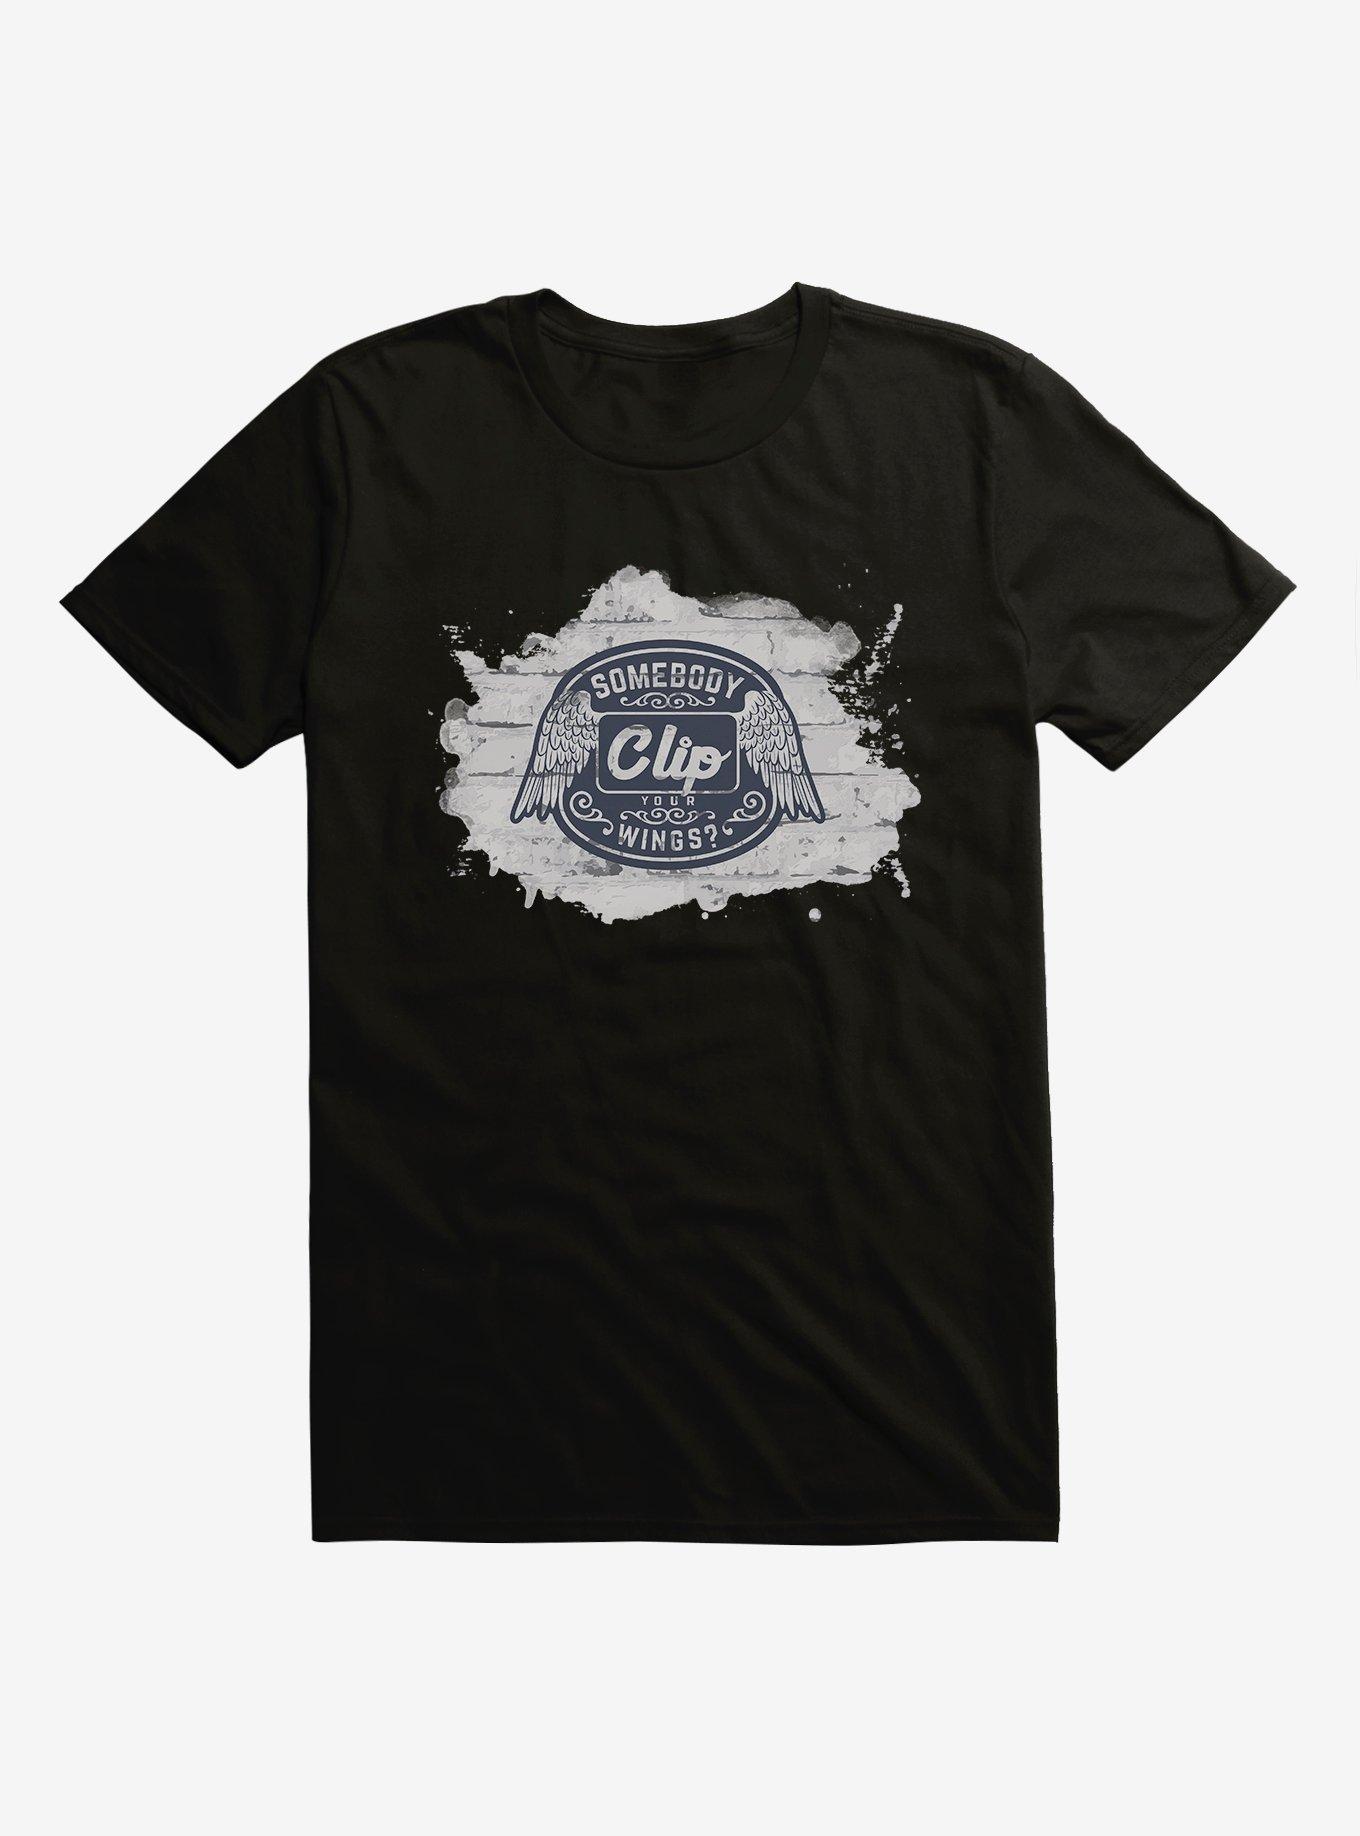 Supernatural Clip Your Wings T-Shirt